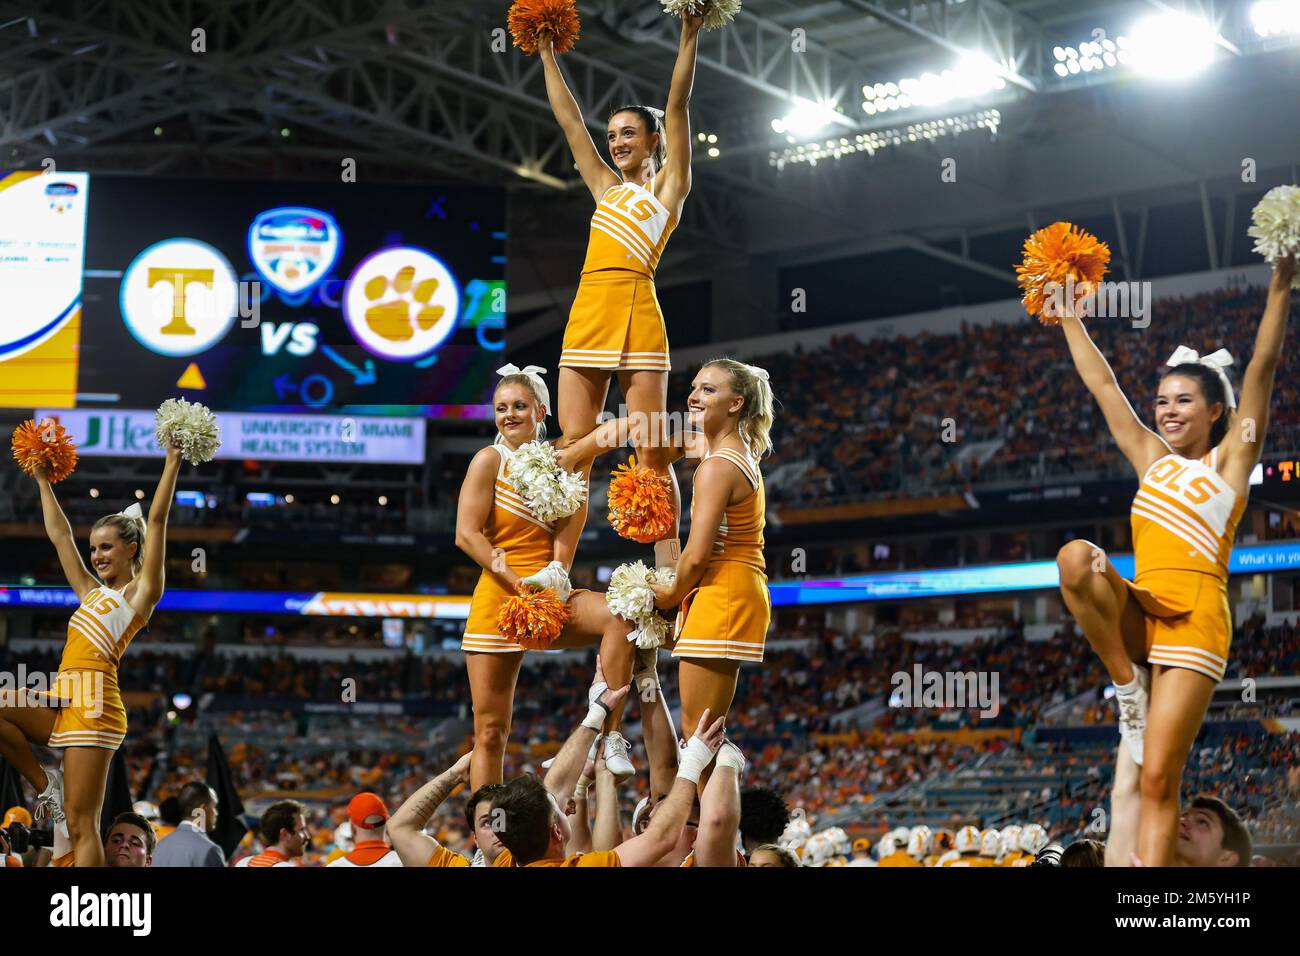 Miami Gardens, FL, USA. 30th Dec, 2022. The Tennessee cheerleaders perform a pyramid during the 2022 Capital One Orange Bowl football game between the Clemson Tigers and Tennessee Volunteers at Hard Rock Stadium in Miami Gardens, FL. Kyle Okita/CSM/Alamy Live News Stock Photo